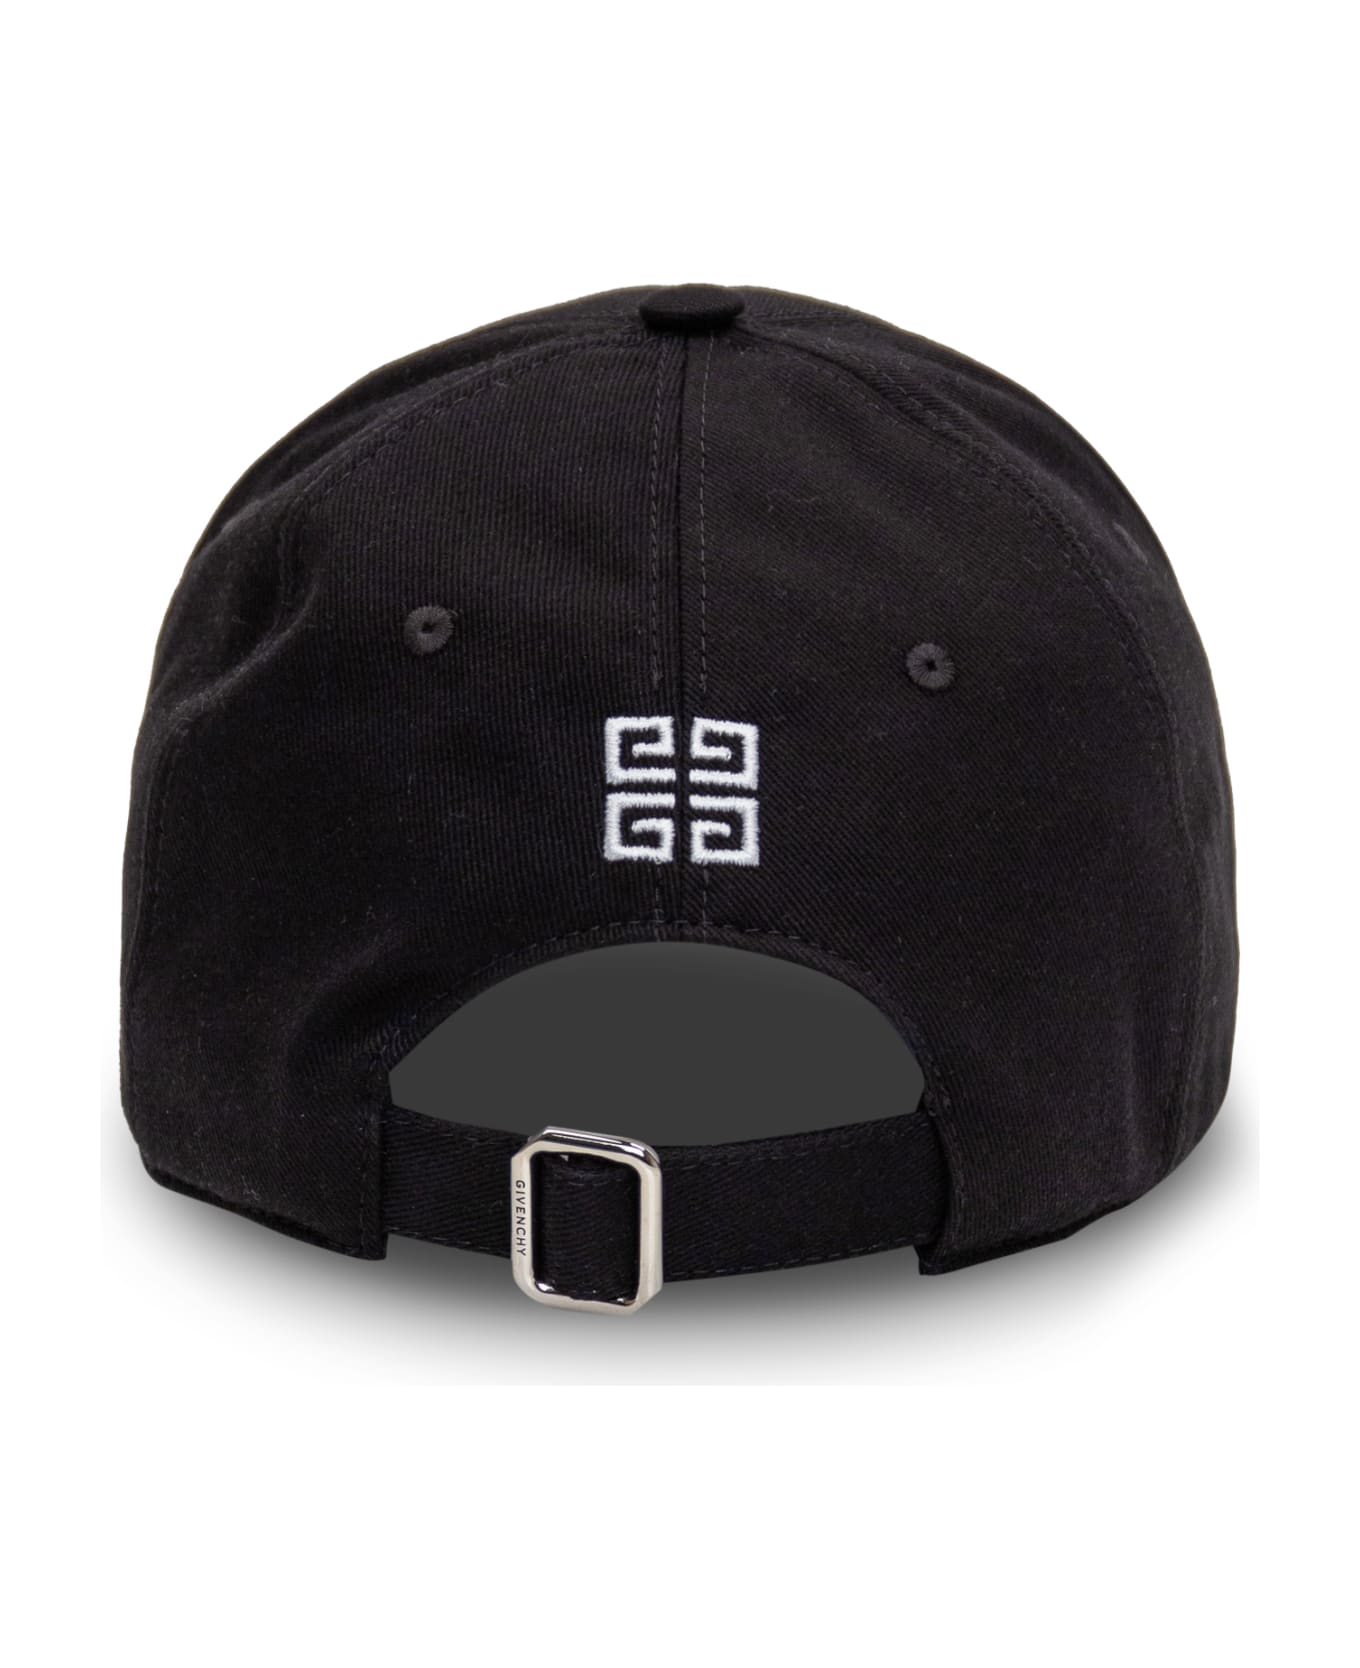 Givenchy Black Baseball Hat With Givenchy College Embroidery - Black 帽子